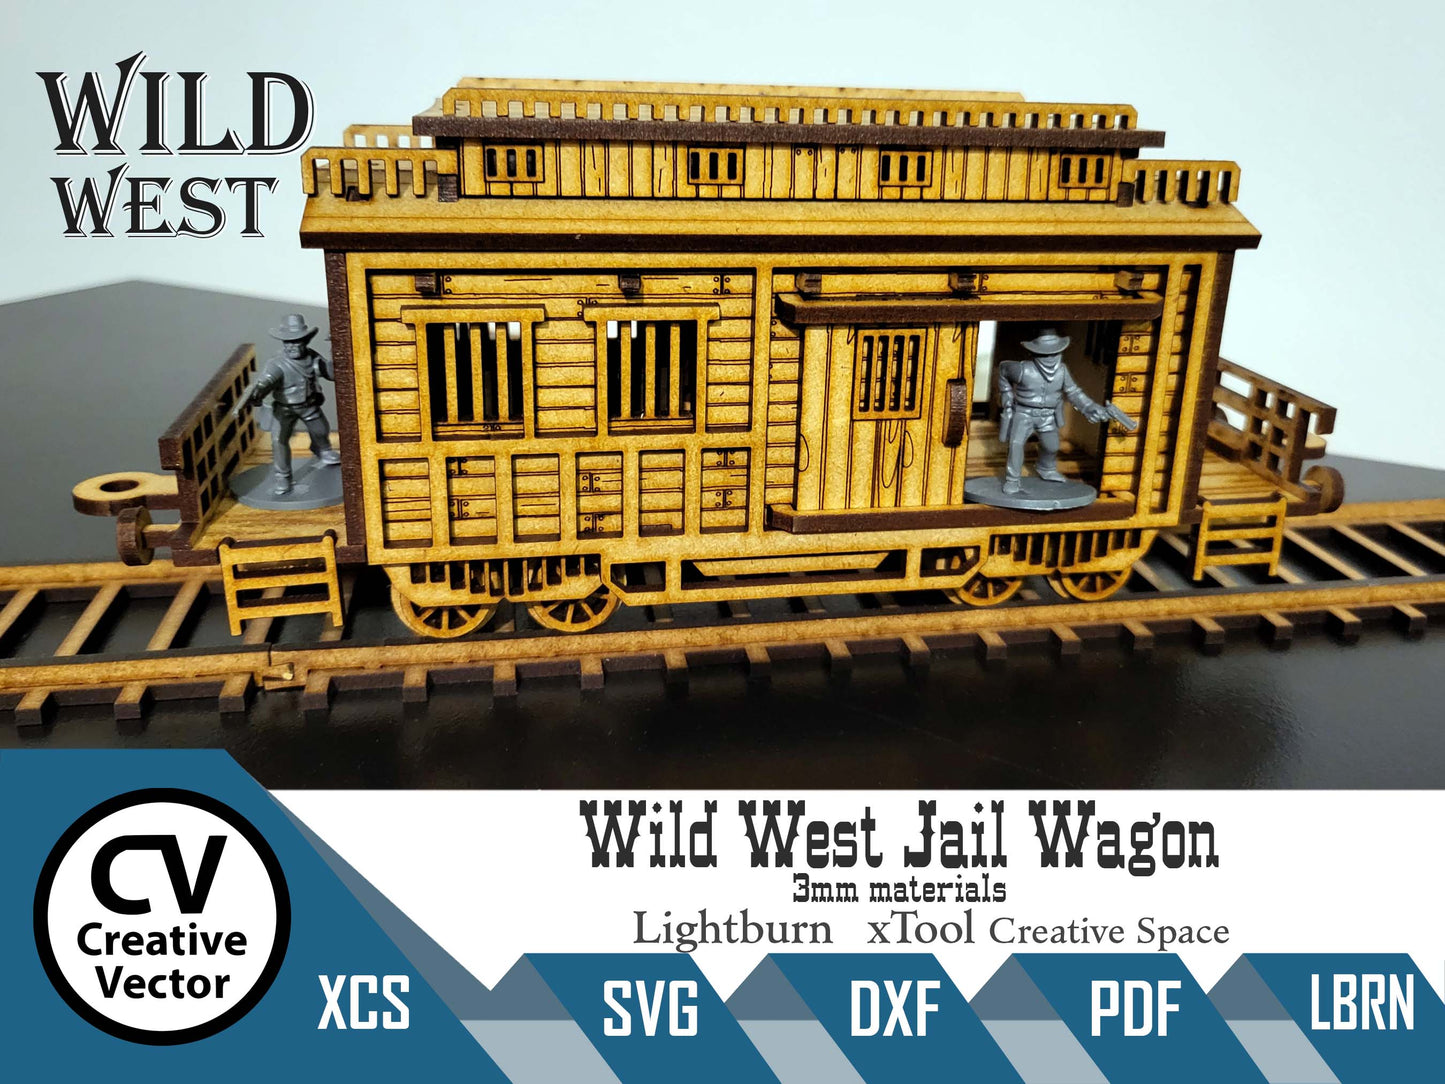 Wild West Jail wagon + rails  in scale 28mm for Wargamers